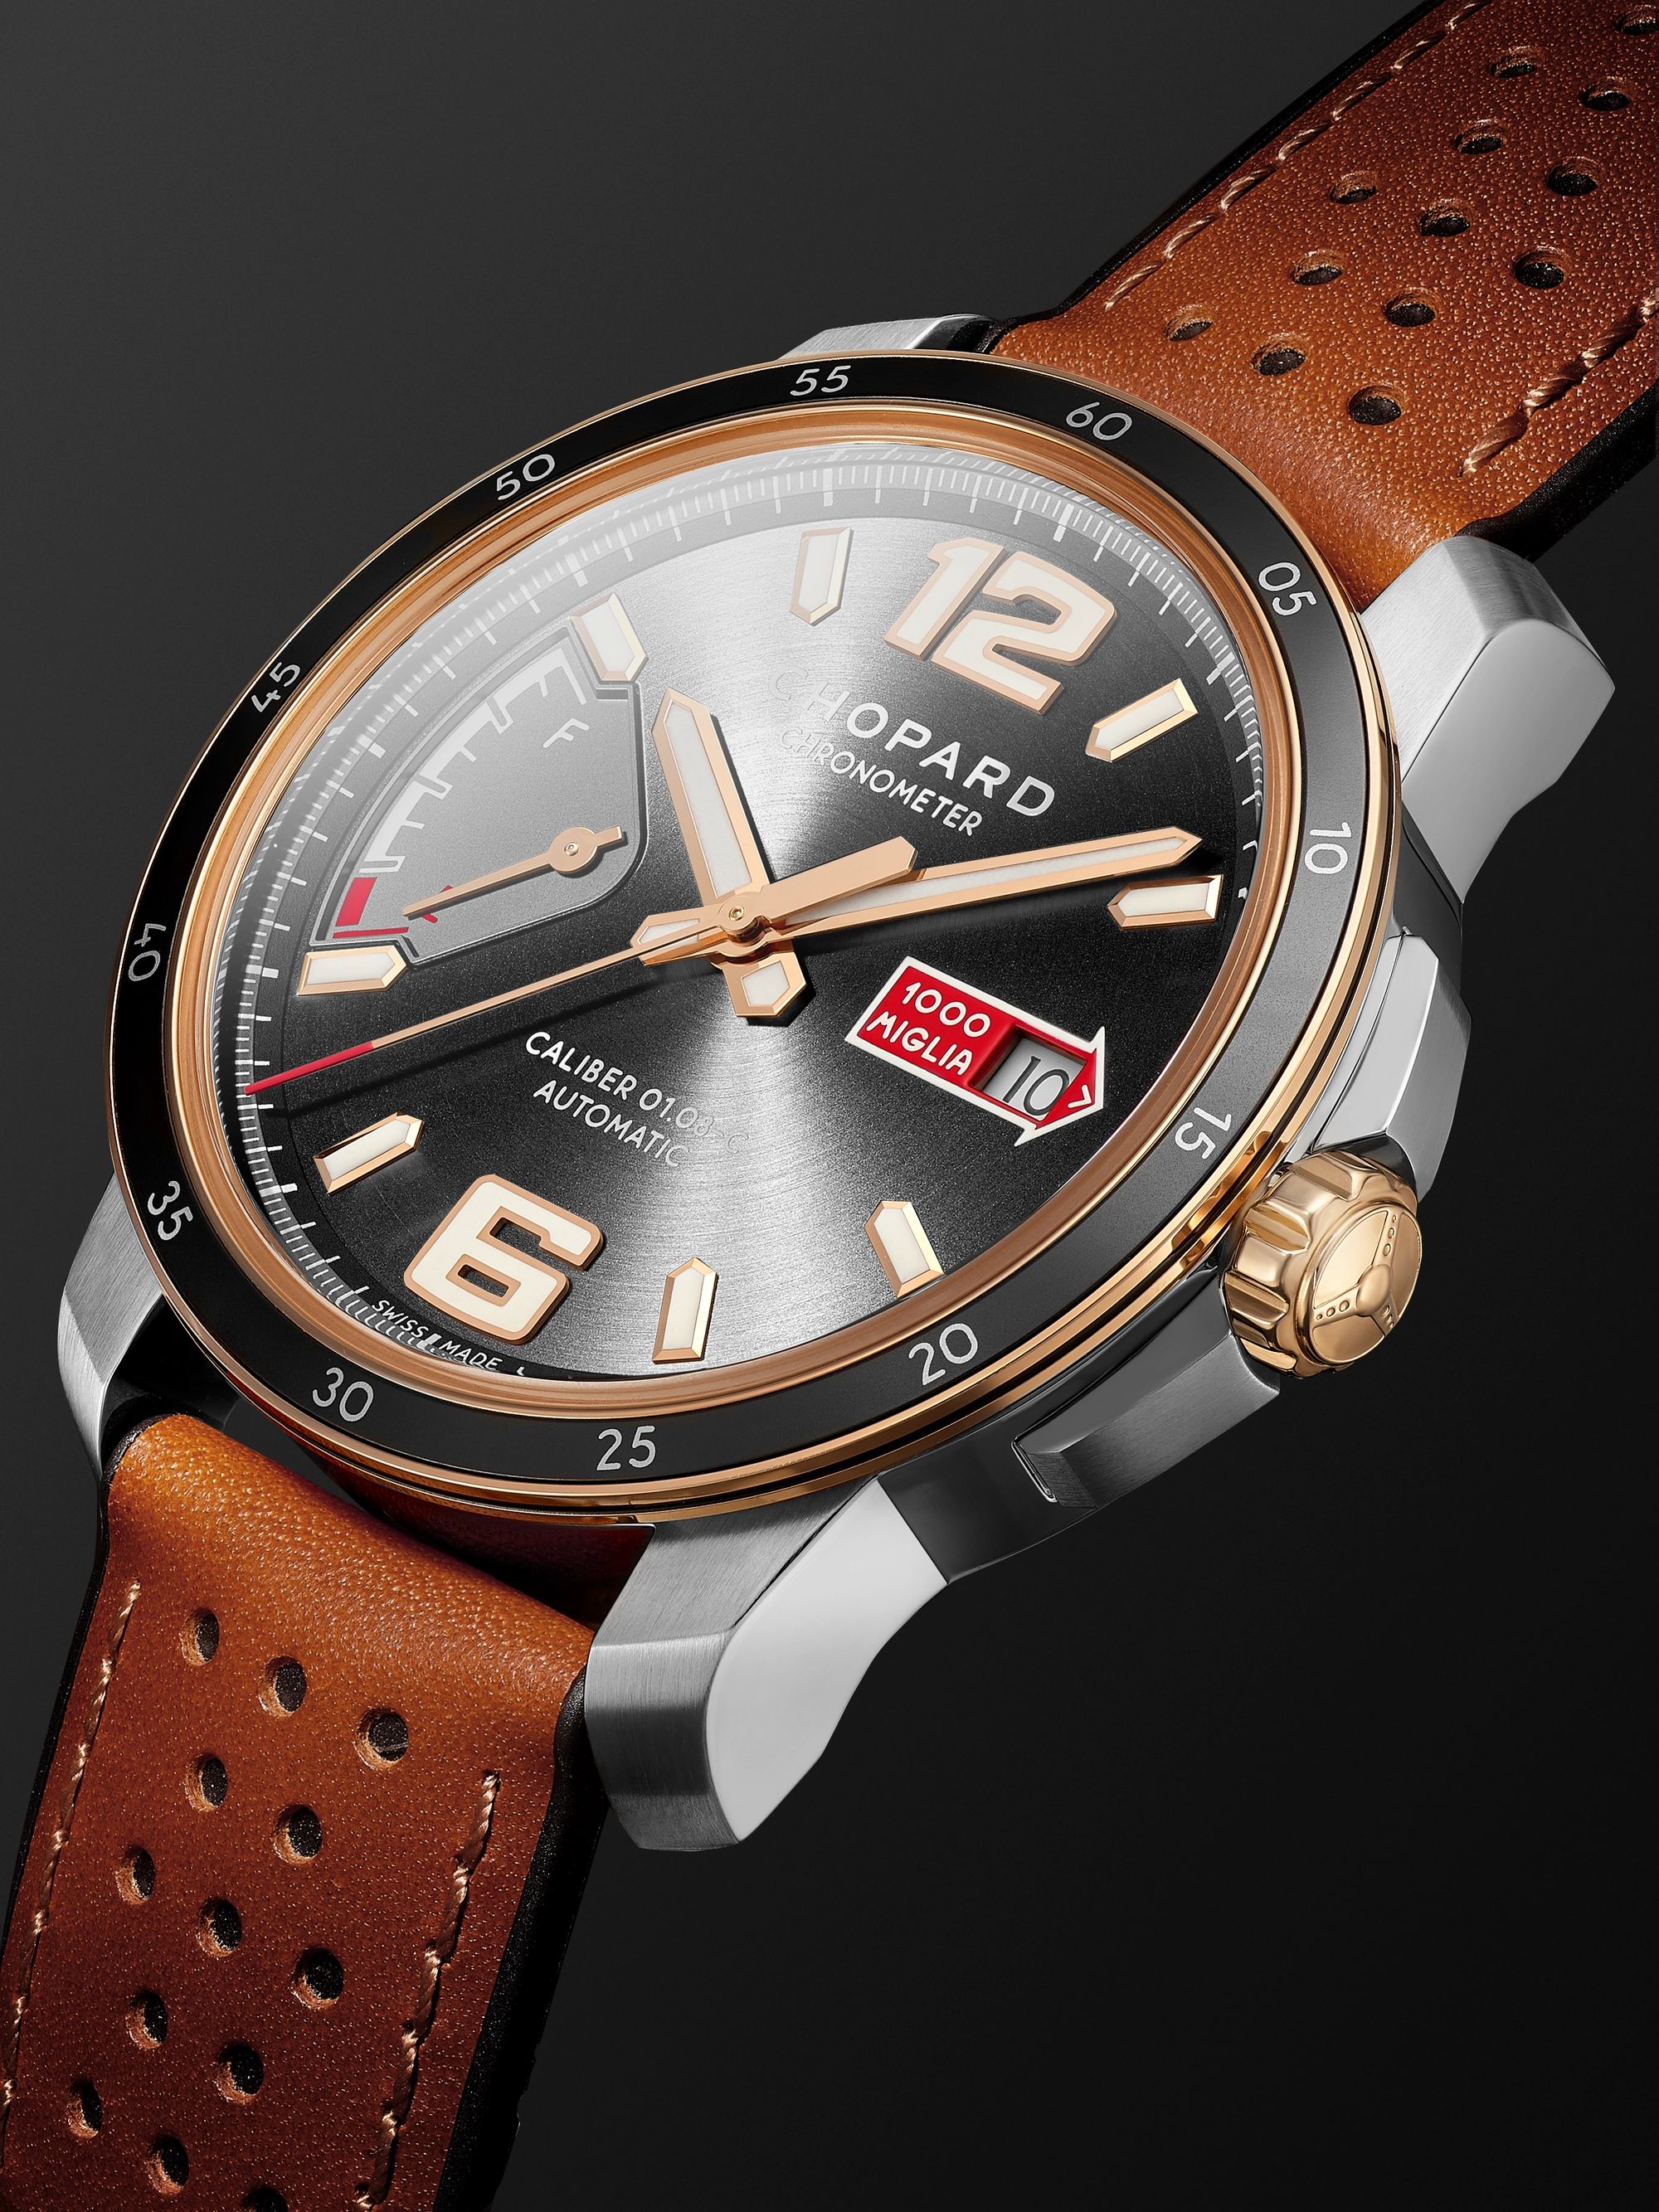 Gray Mille Miglia GTS Power Control Limited Edition Automatic 43mm,  18-Karat Rose Gold, Stainless Steel and Leather Watch, Ref. No. 168566-6001  | CHOPARD | MR PORTER